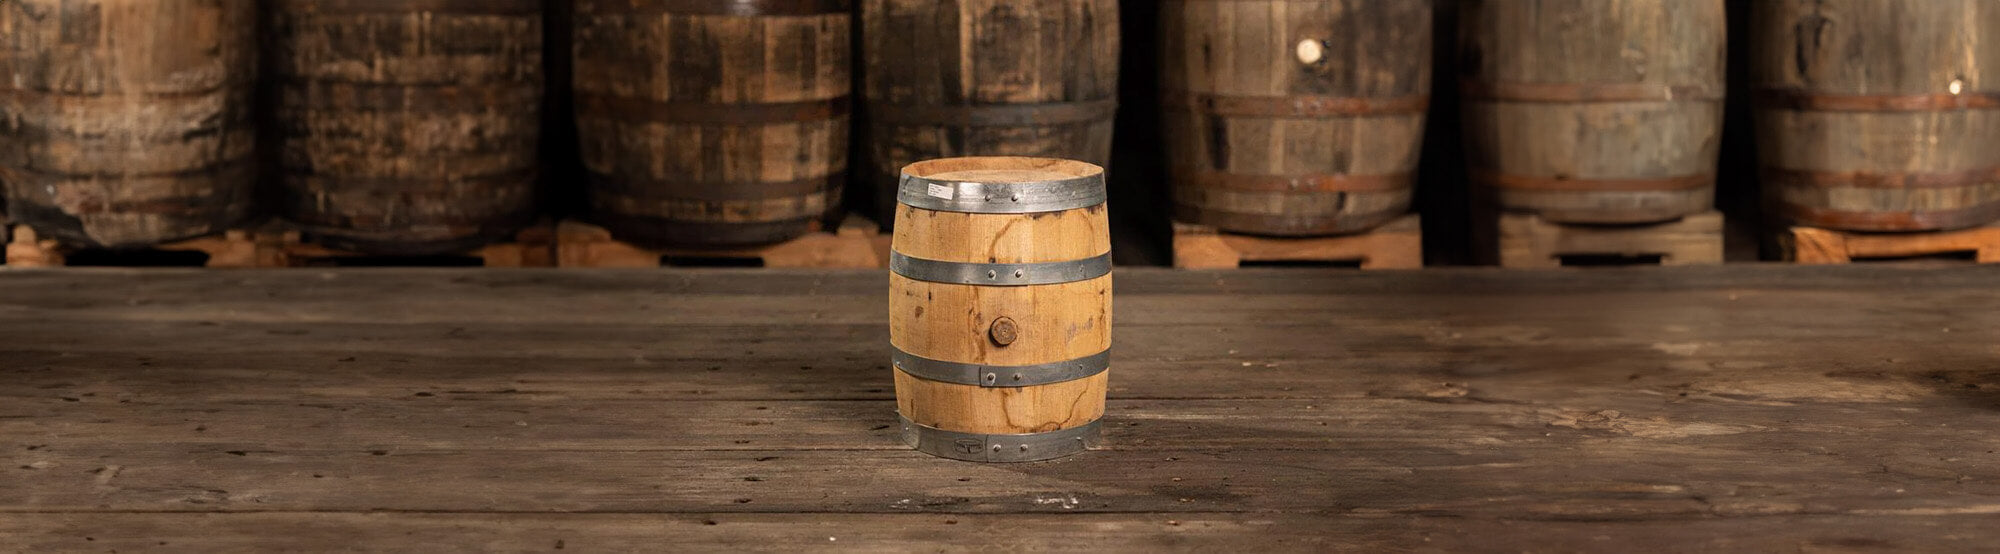 Freshly emptied 5 gallon barrel with full-size barrels behind on pallets